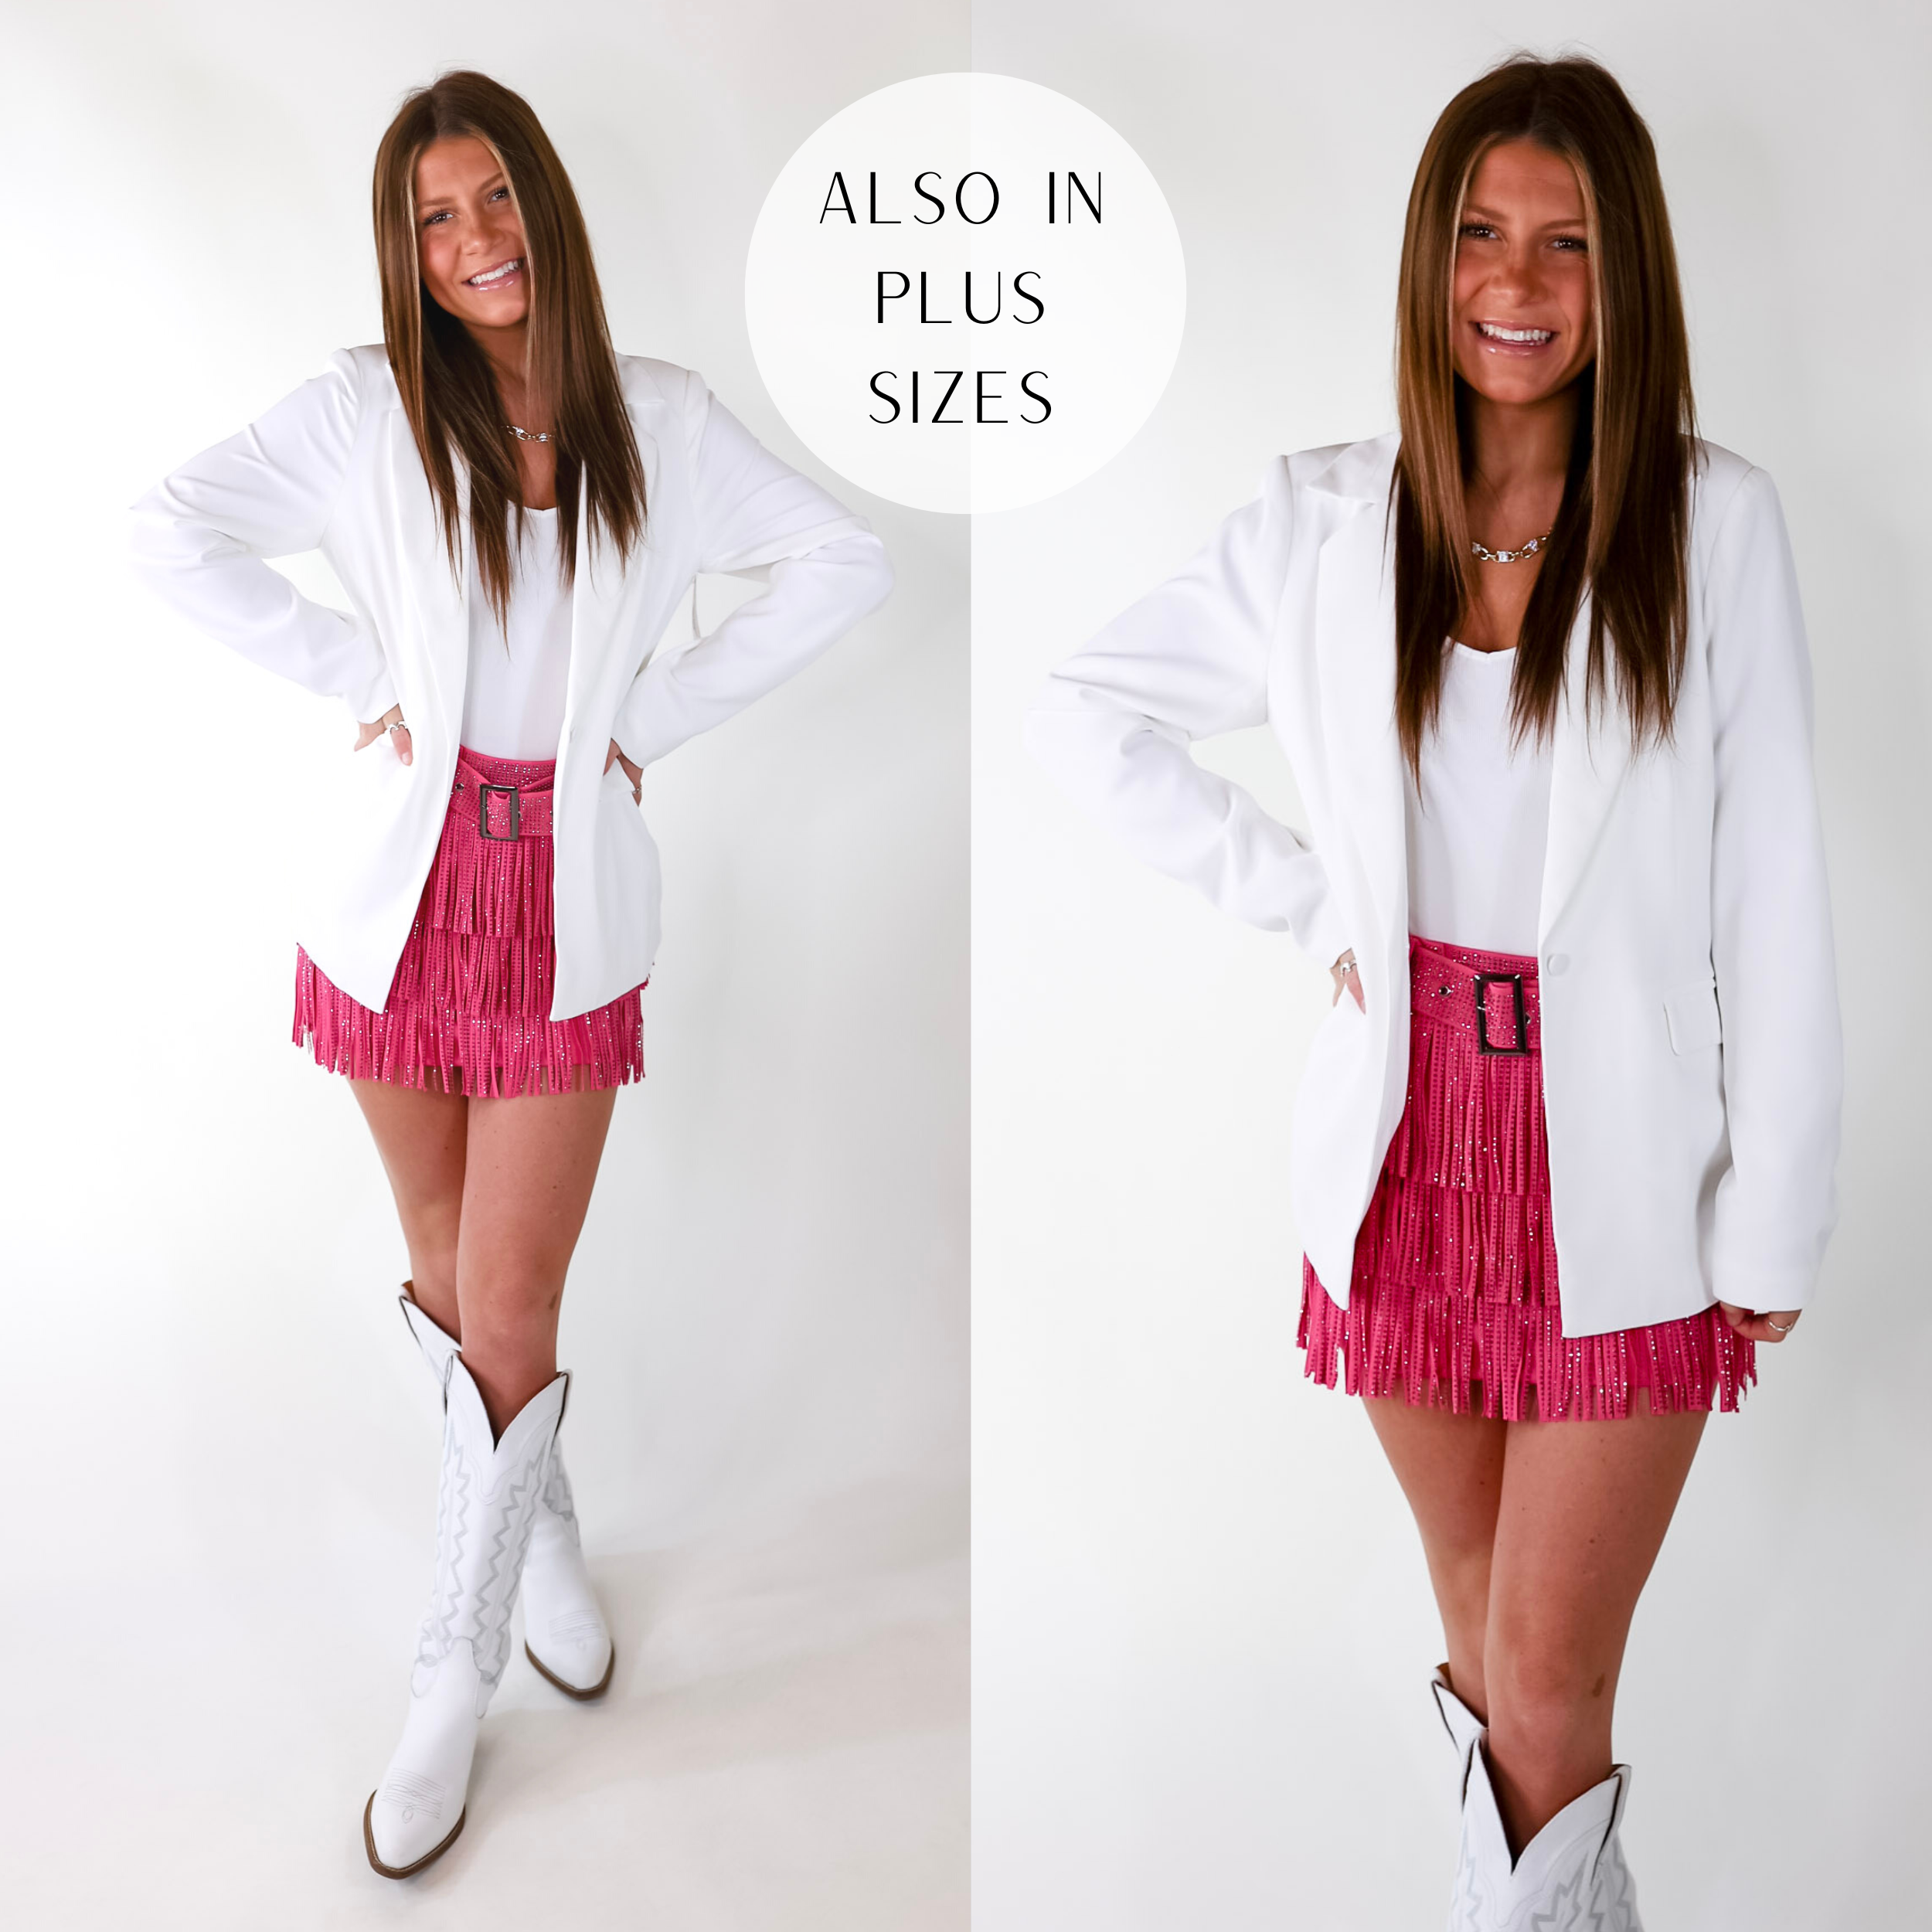 Model is wearing a solid white blazer with long sleeves and pockets.